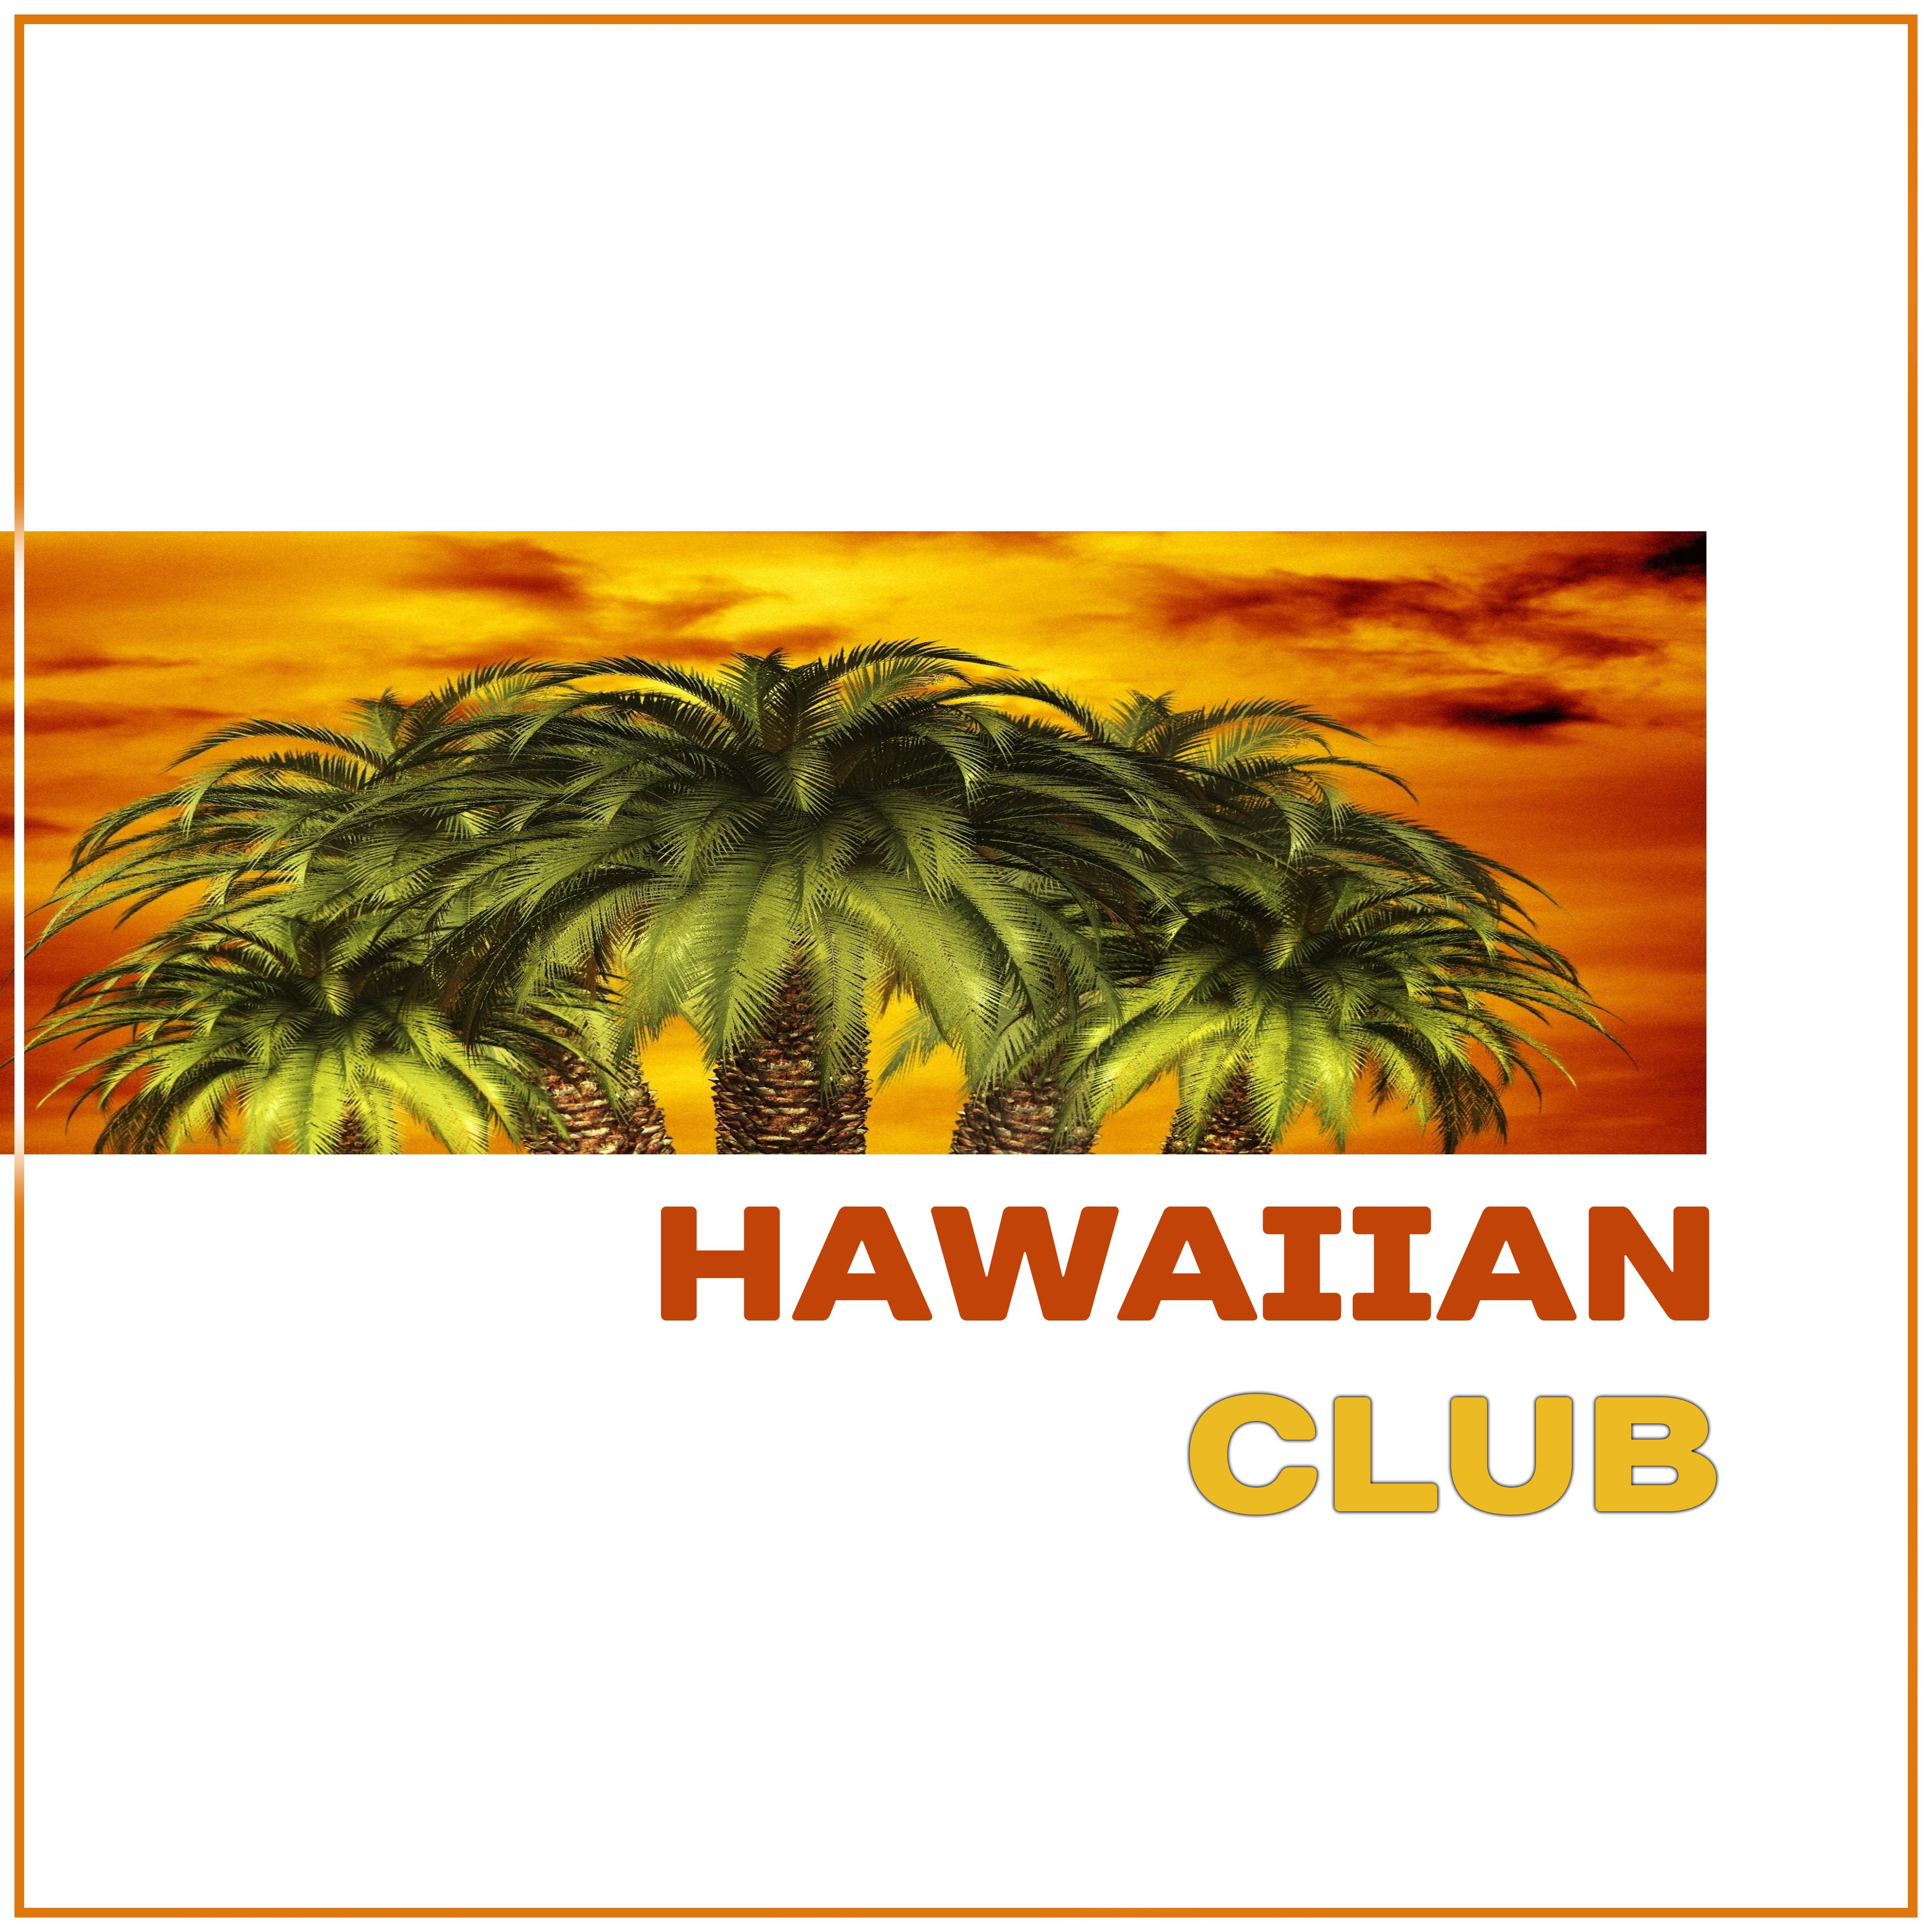 Hawaiian Club  Party Night,  Music for Dancing, Summer Chill Out, Dancefloor,  Vibes 69, Beach Party, Drink Bar